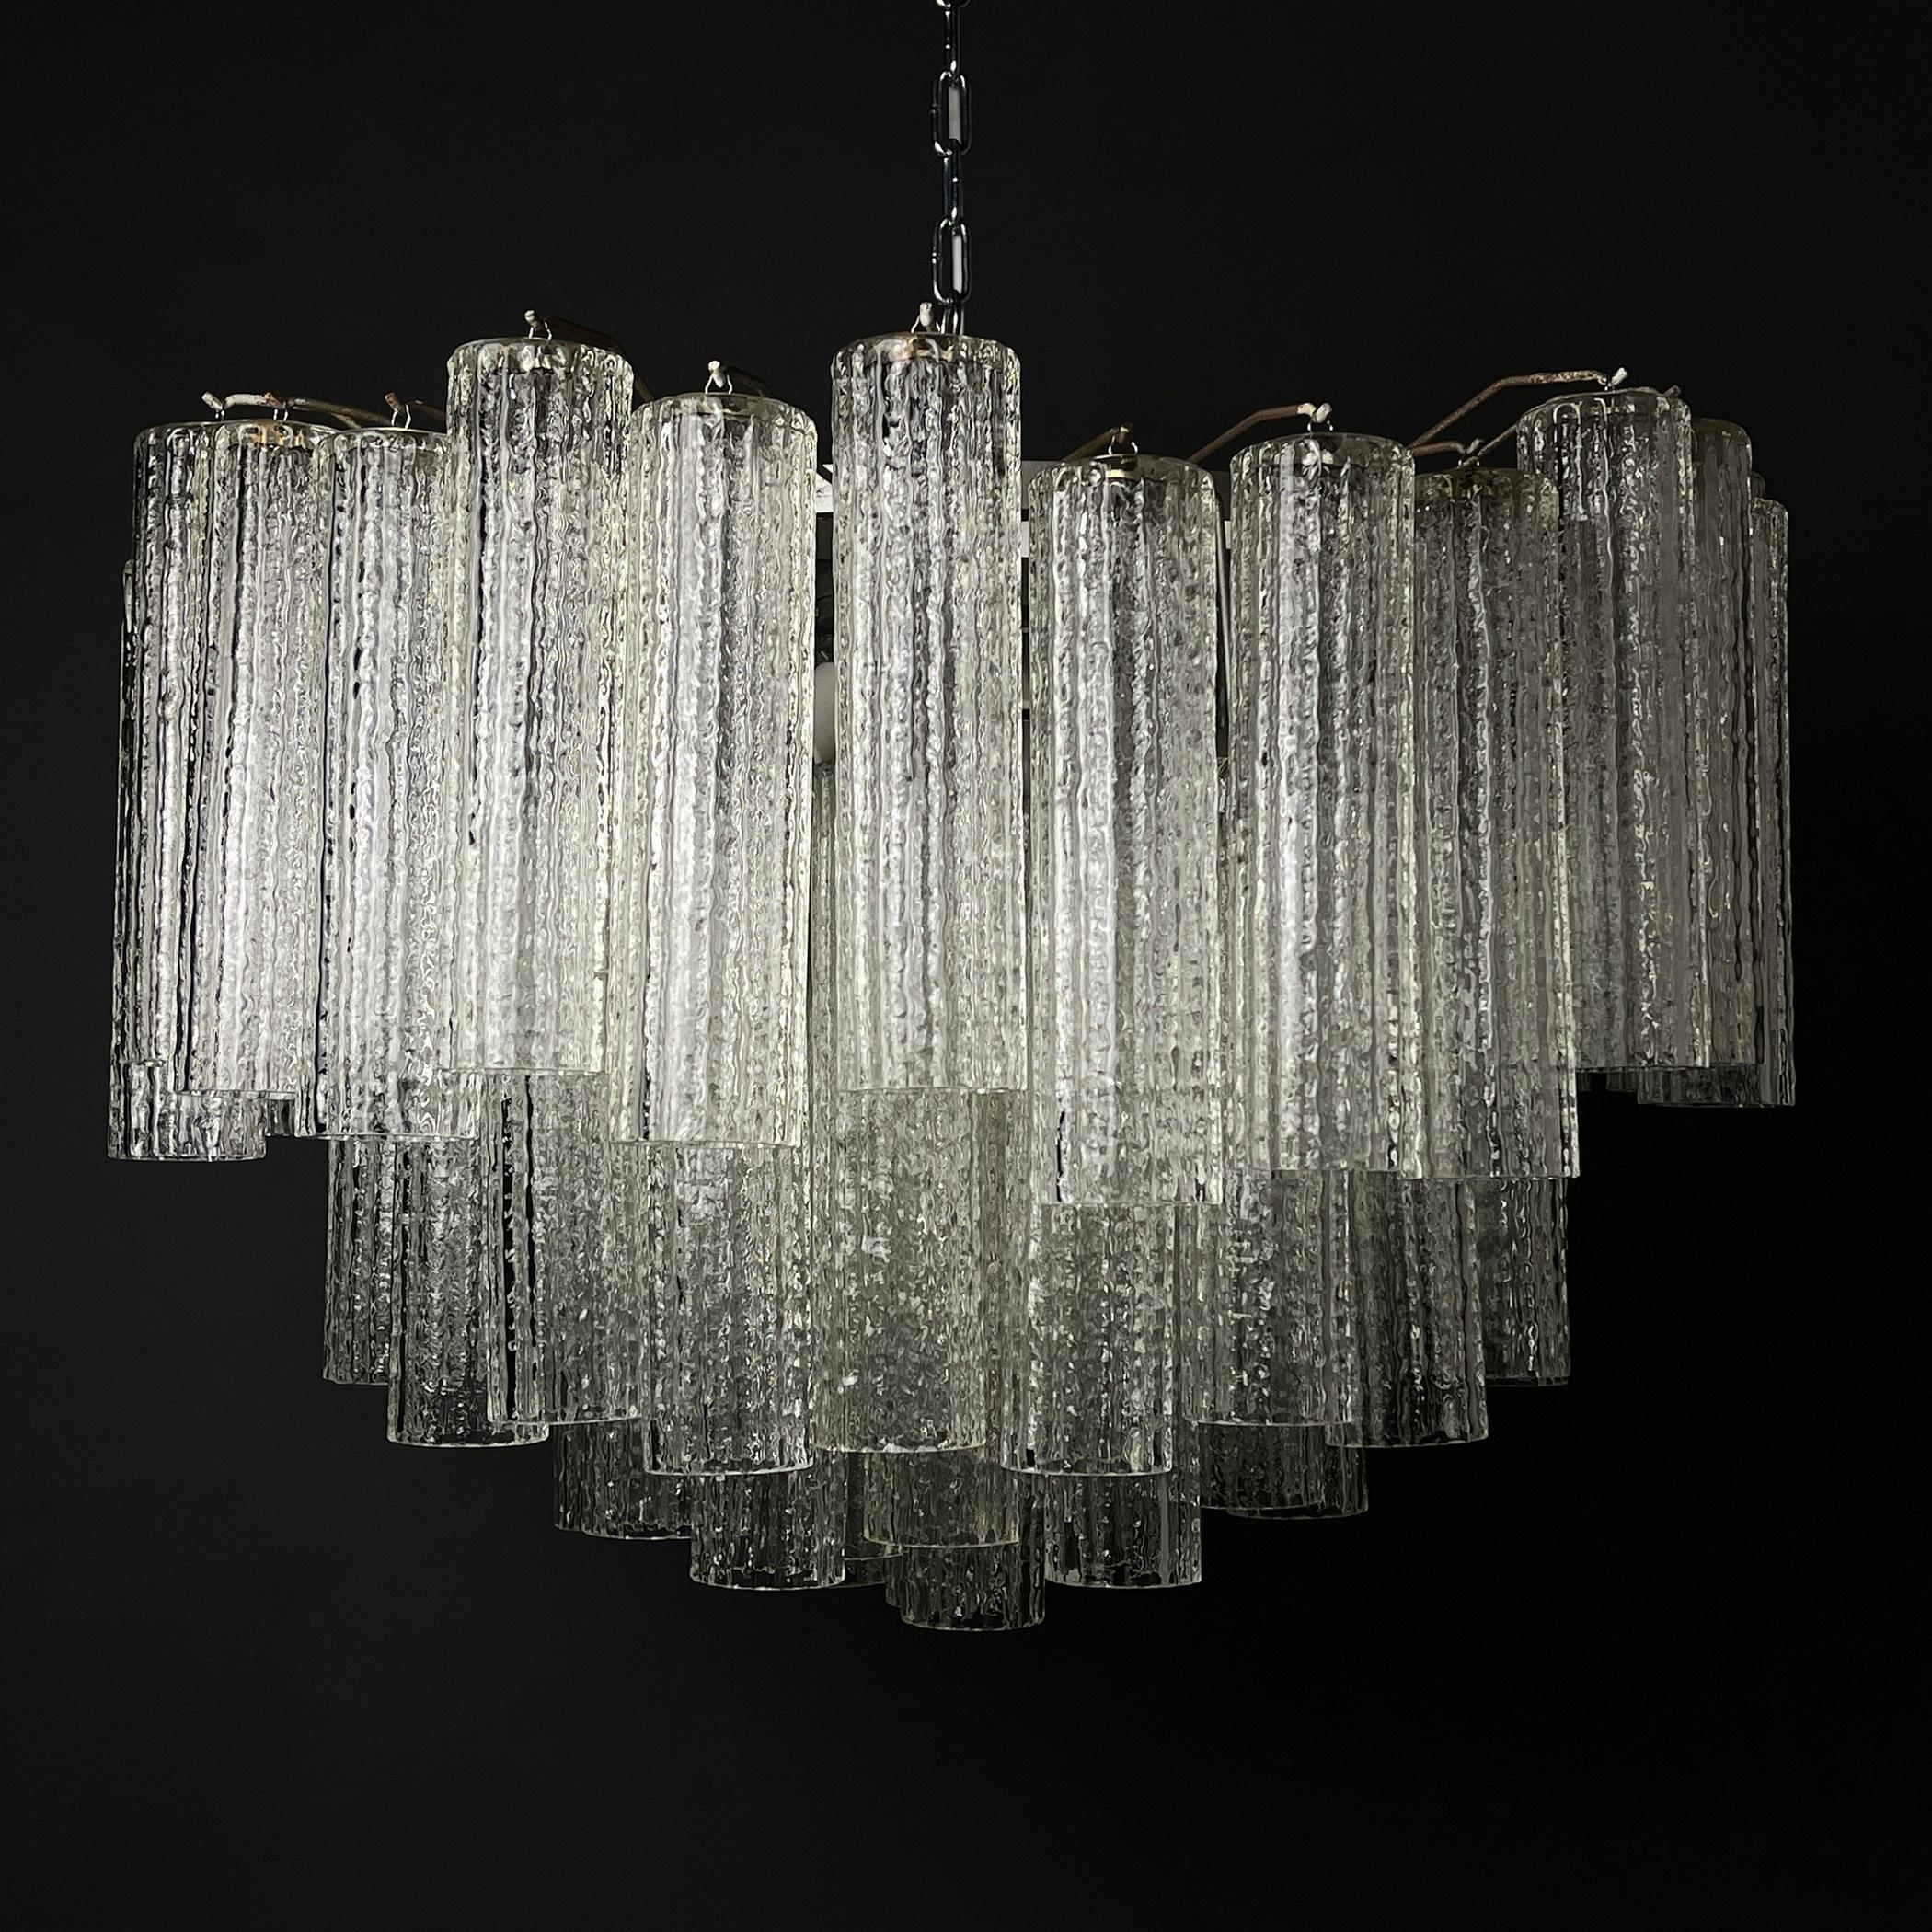 The incredible beautiful chandelier made of Murano glass Tronchi by Toni Zuccheri for Venini. Made in Italy in the 1960s. Designer Toni Zuccheri for Venini & Co. Venini & Co. played a leading role in the revival of Italy’s high-end glass industry,